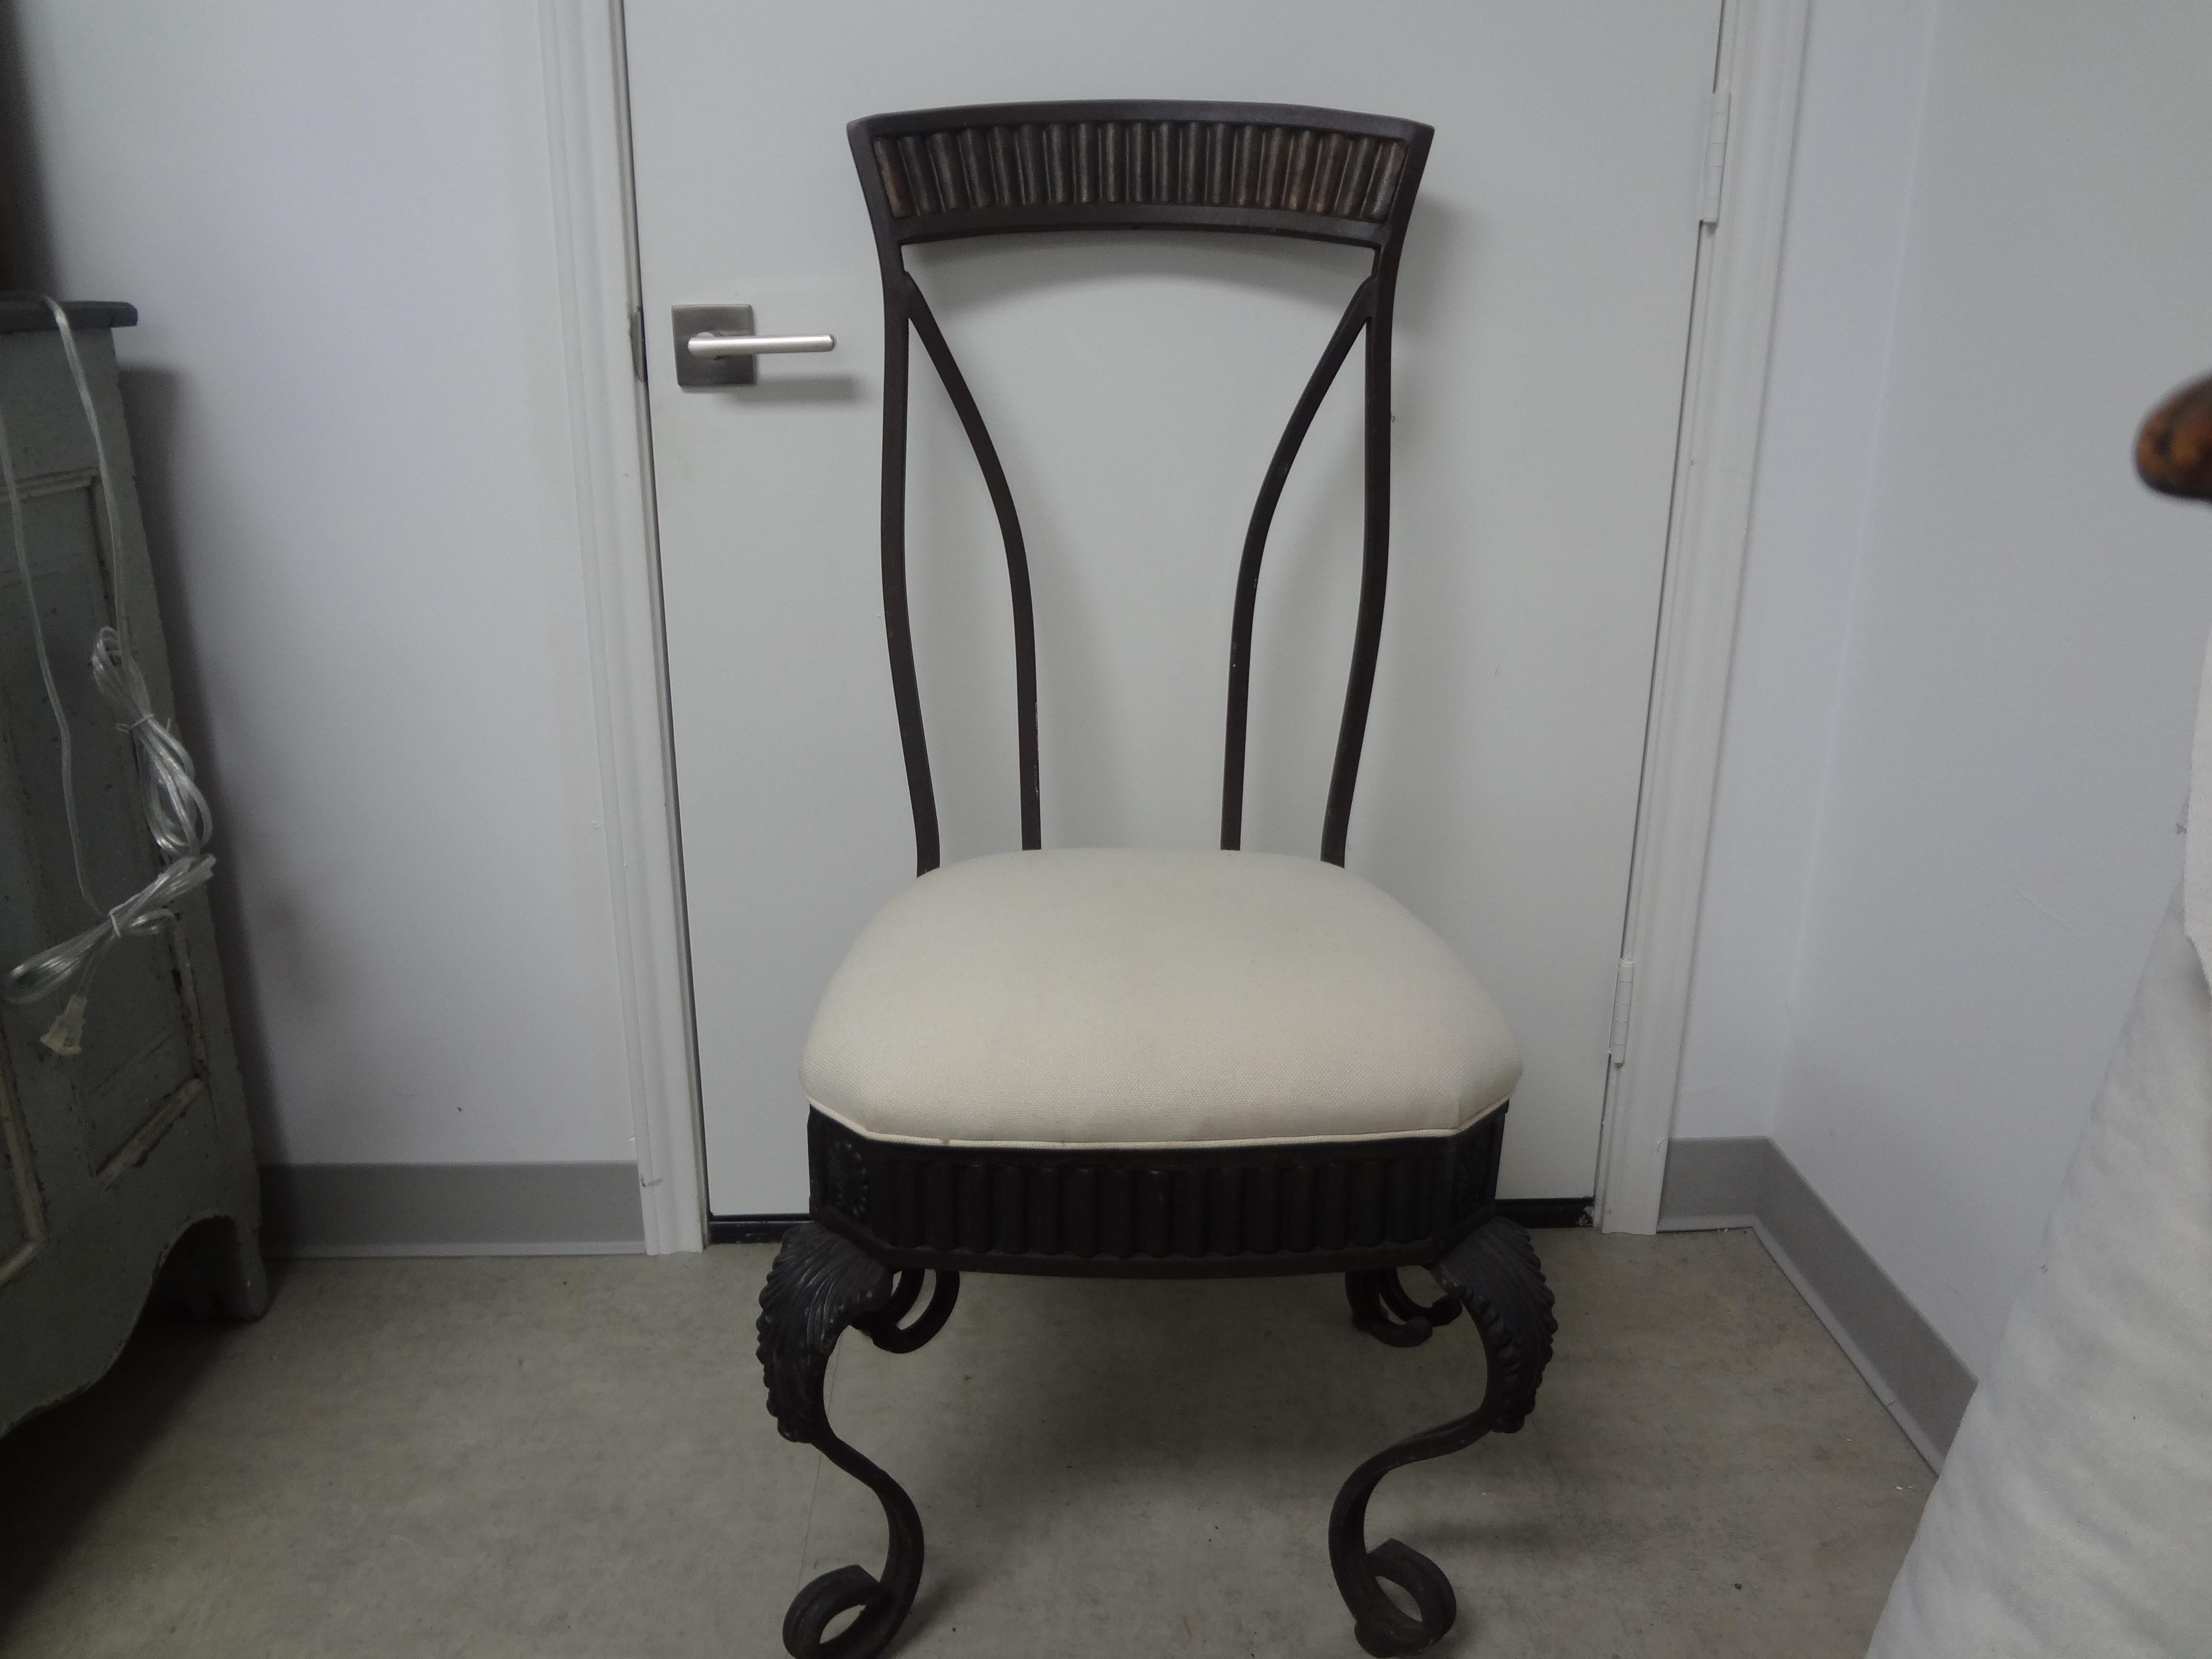 Pair Of Italian Wrought Iron Garden Chairs.
This lovely pair of Italian Hollywood Regency style designer wrought iron chairs have a curvaceous design and are equally at home in or outside your home.
Upholstery is used but easy to reupholster in the